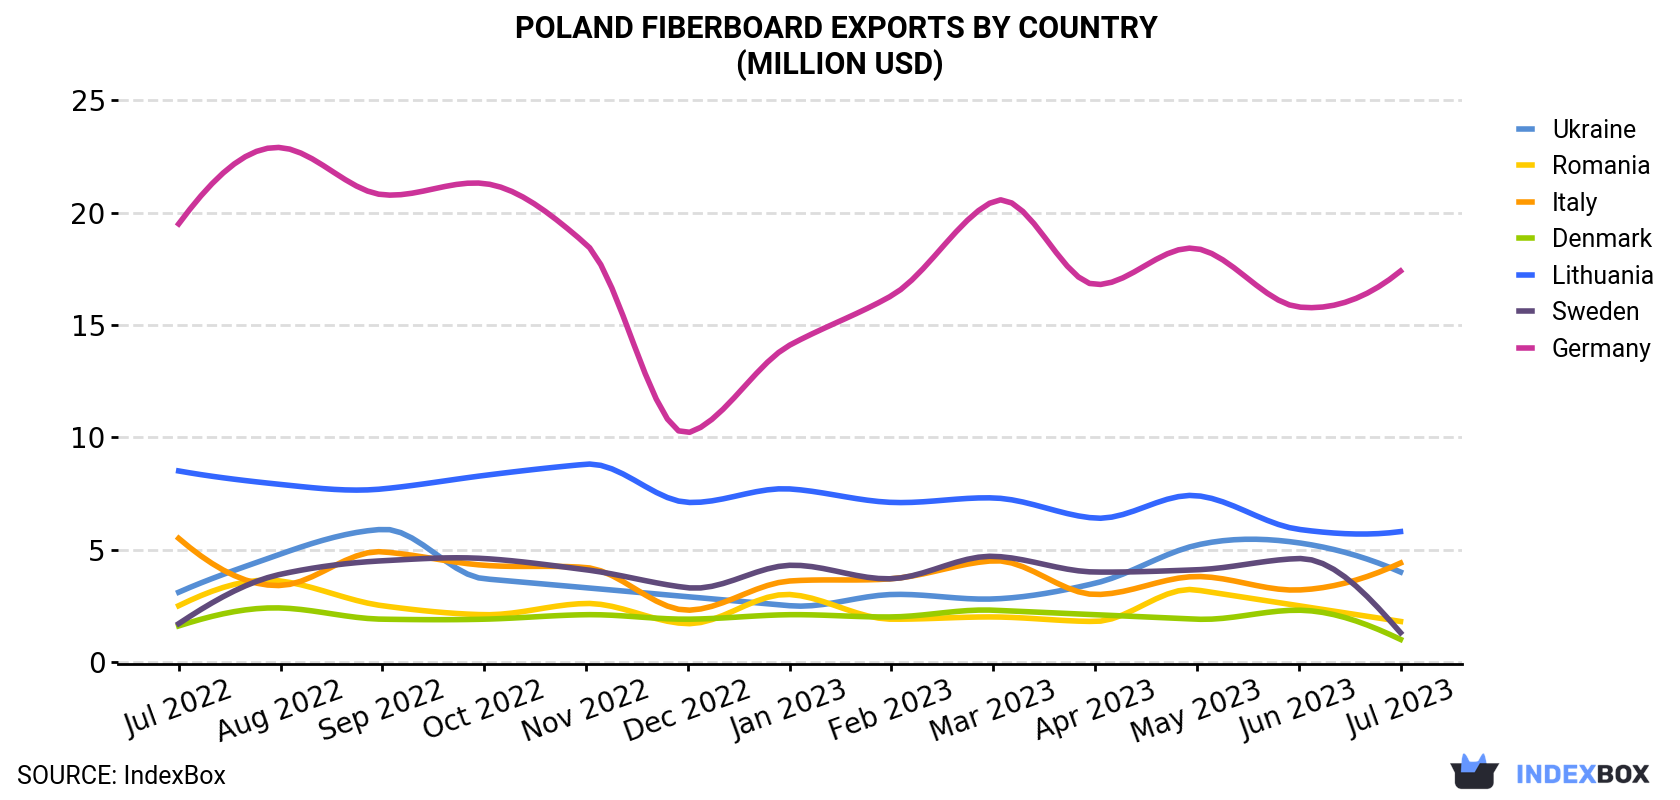 Poland Fiberboard Exports By Country (Million USD)